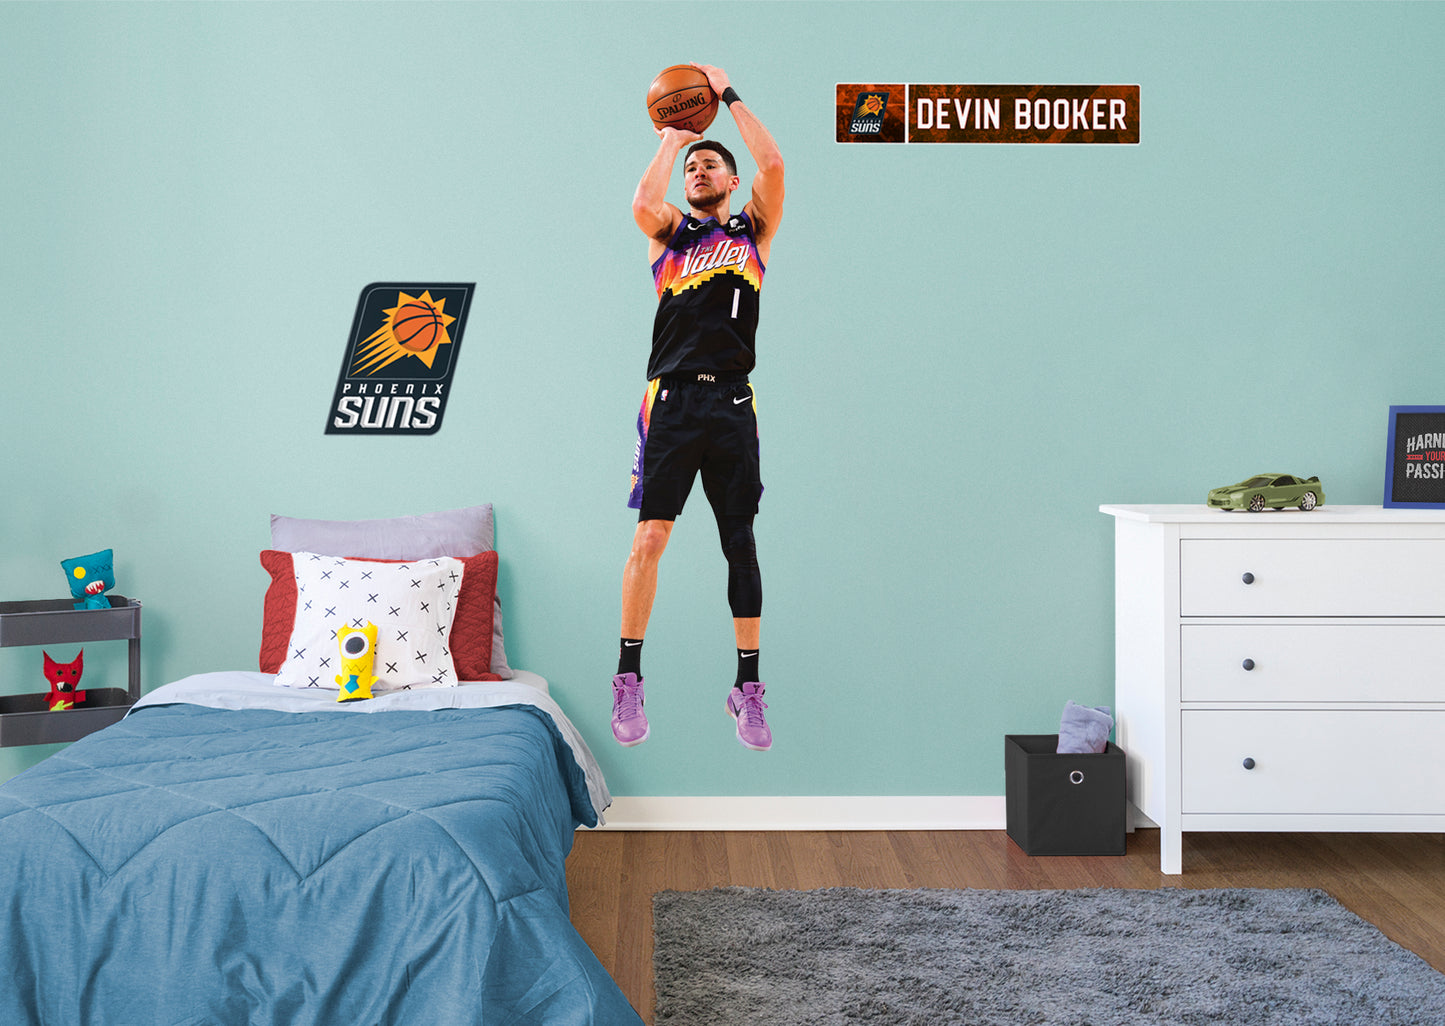 Phoenix Suns: Devin Booker  Shooting        - Officially Licensed NBA Removable Wall   Adhesive Decal